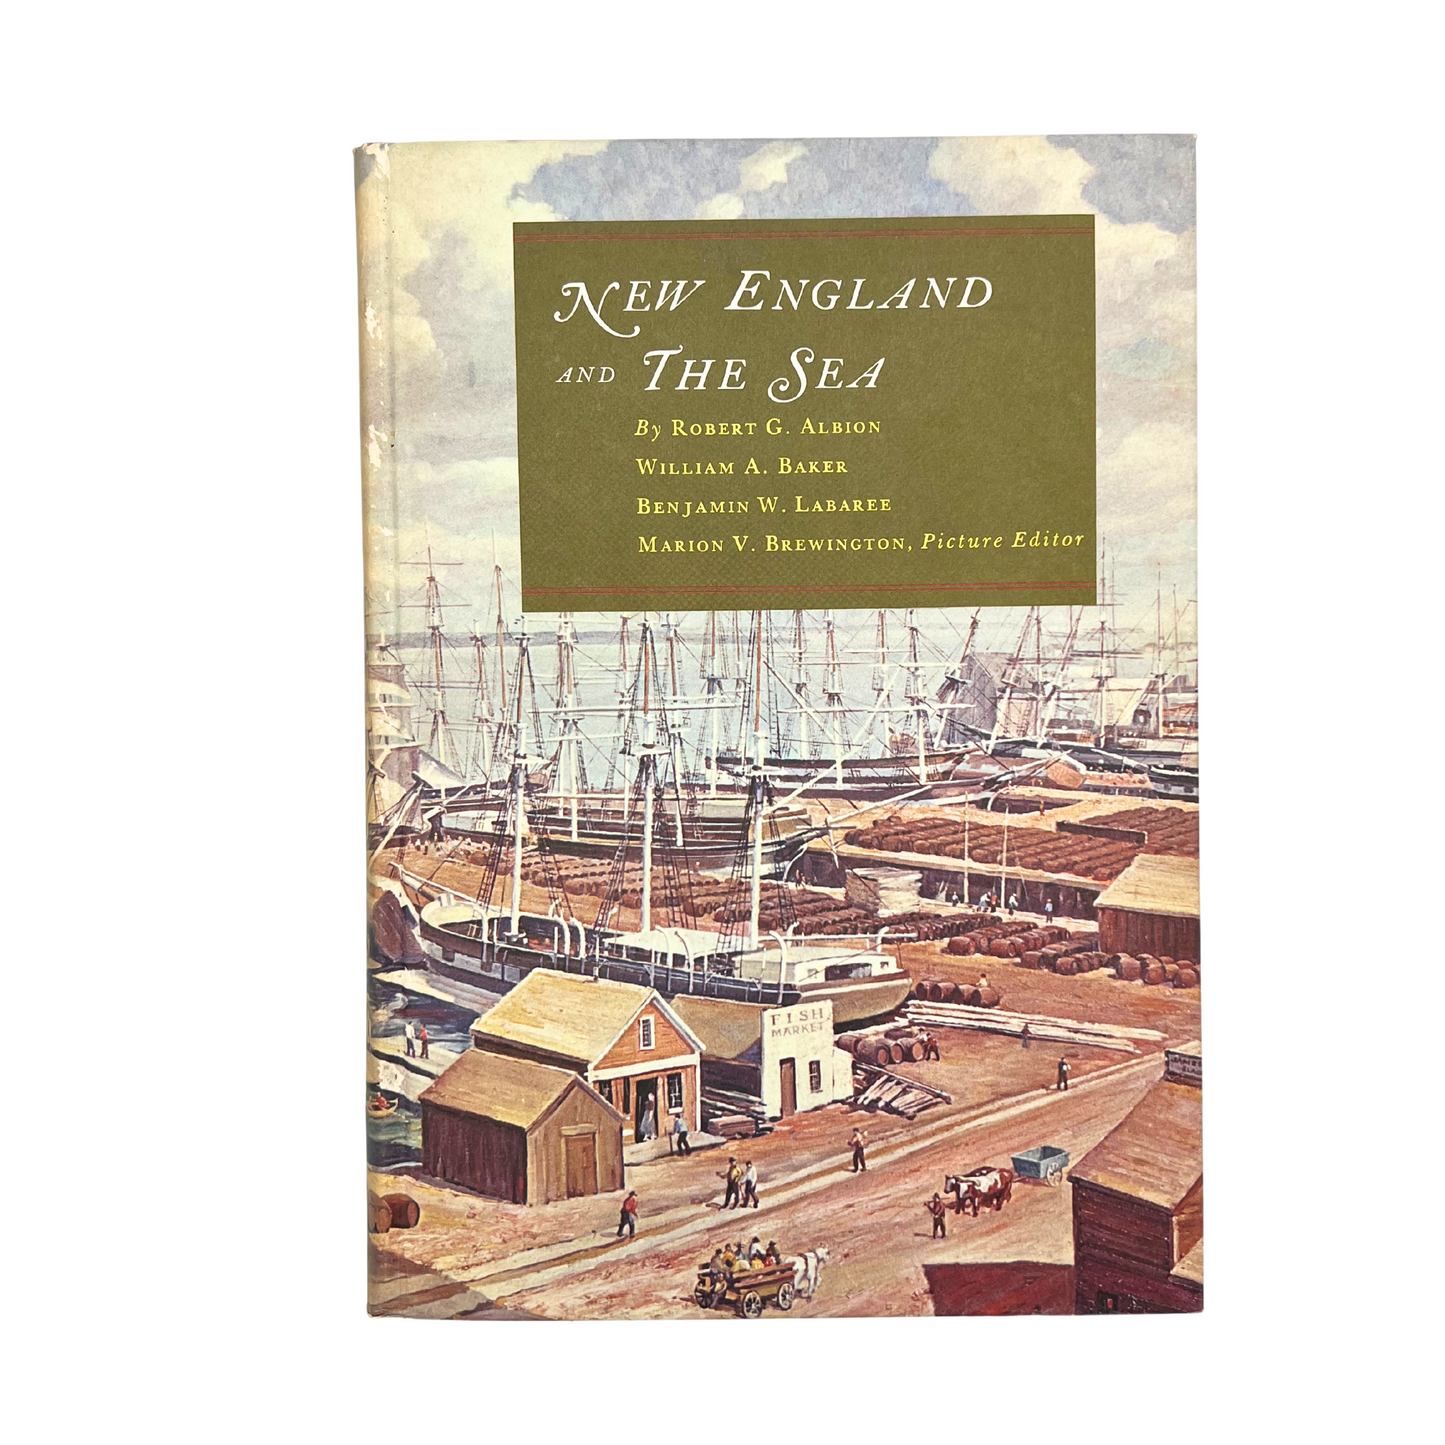 1972 book: New England and the Sea